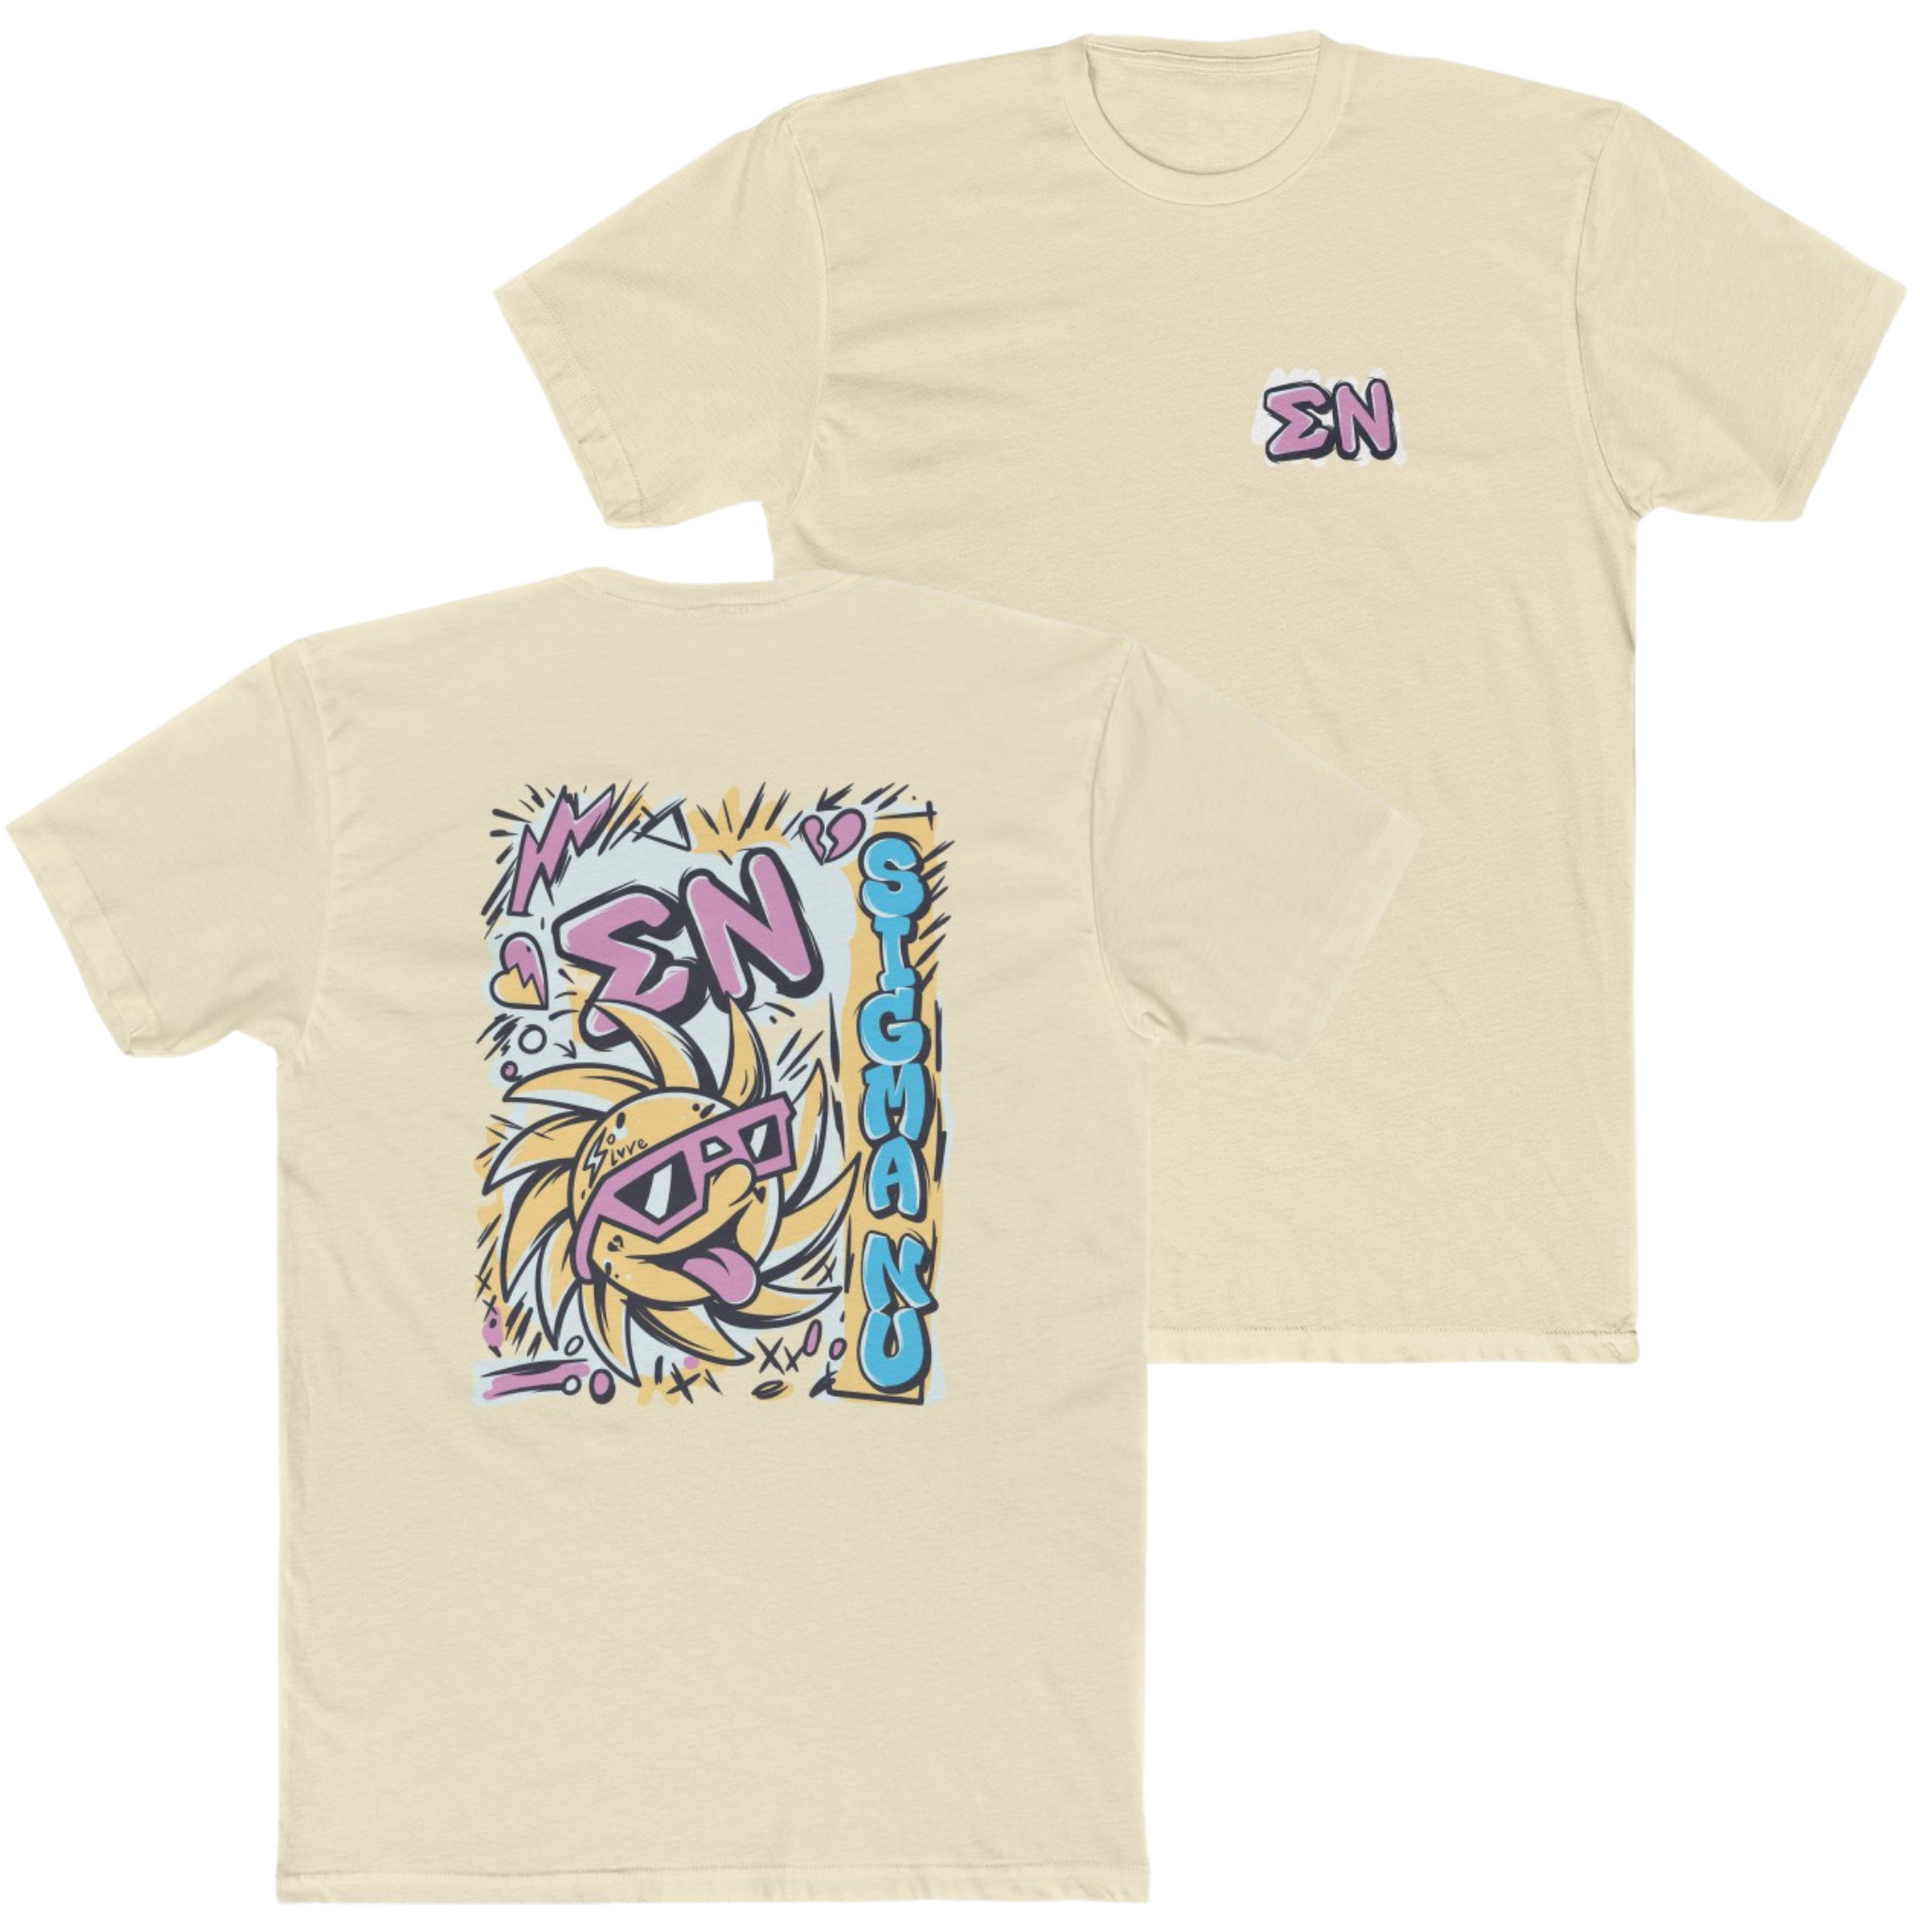 Natural Sigma Nu Graphic T-Shirt | Fun in the Sun | Sigma Nu Clothing, Apparel and Merchandise